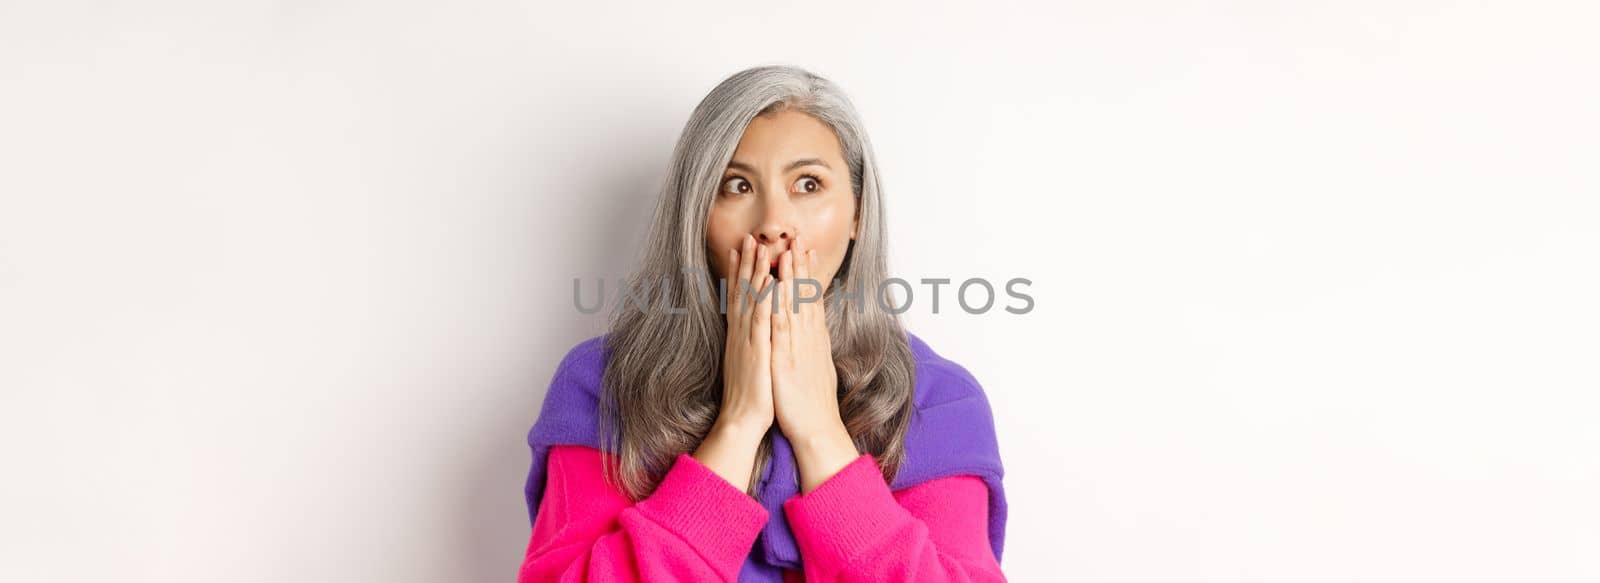 Close-up of shocked asian middle-aged woman with grey hair, gasping and covering mouth startled, looking left, realising something, white background.